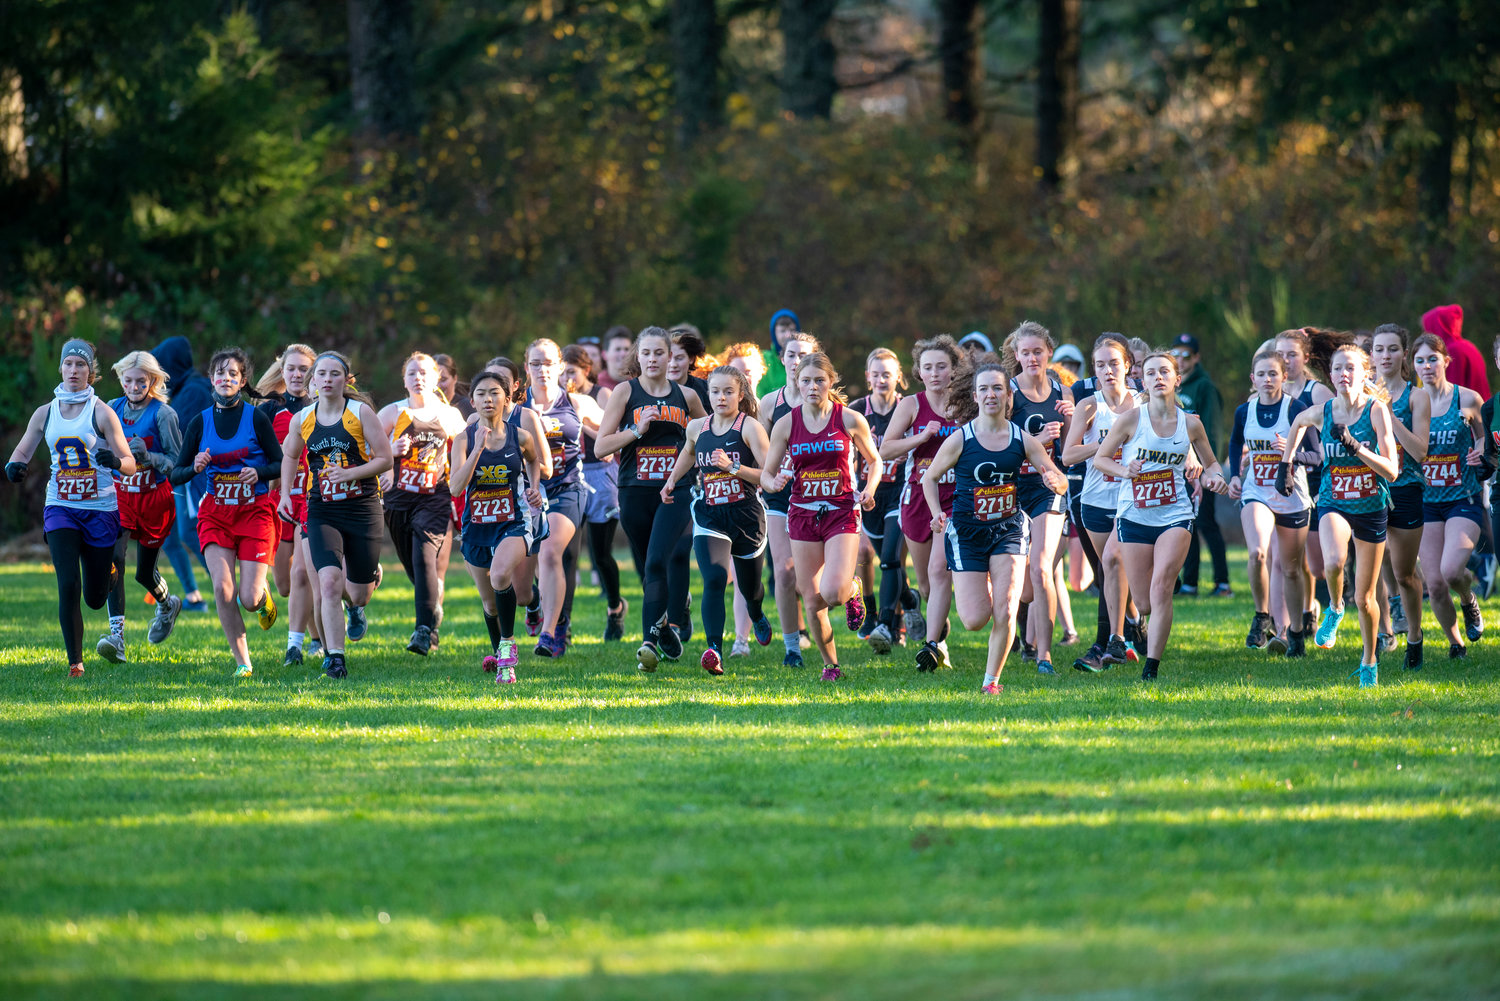 Runners take off from the starting line at the 2B District 4 girls cross country meet Saturday in Rainier.